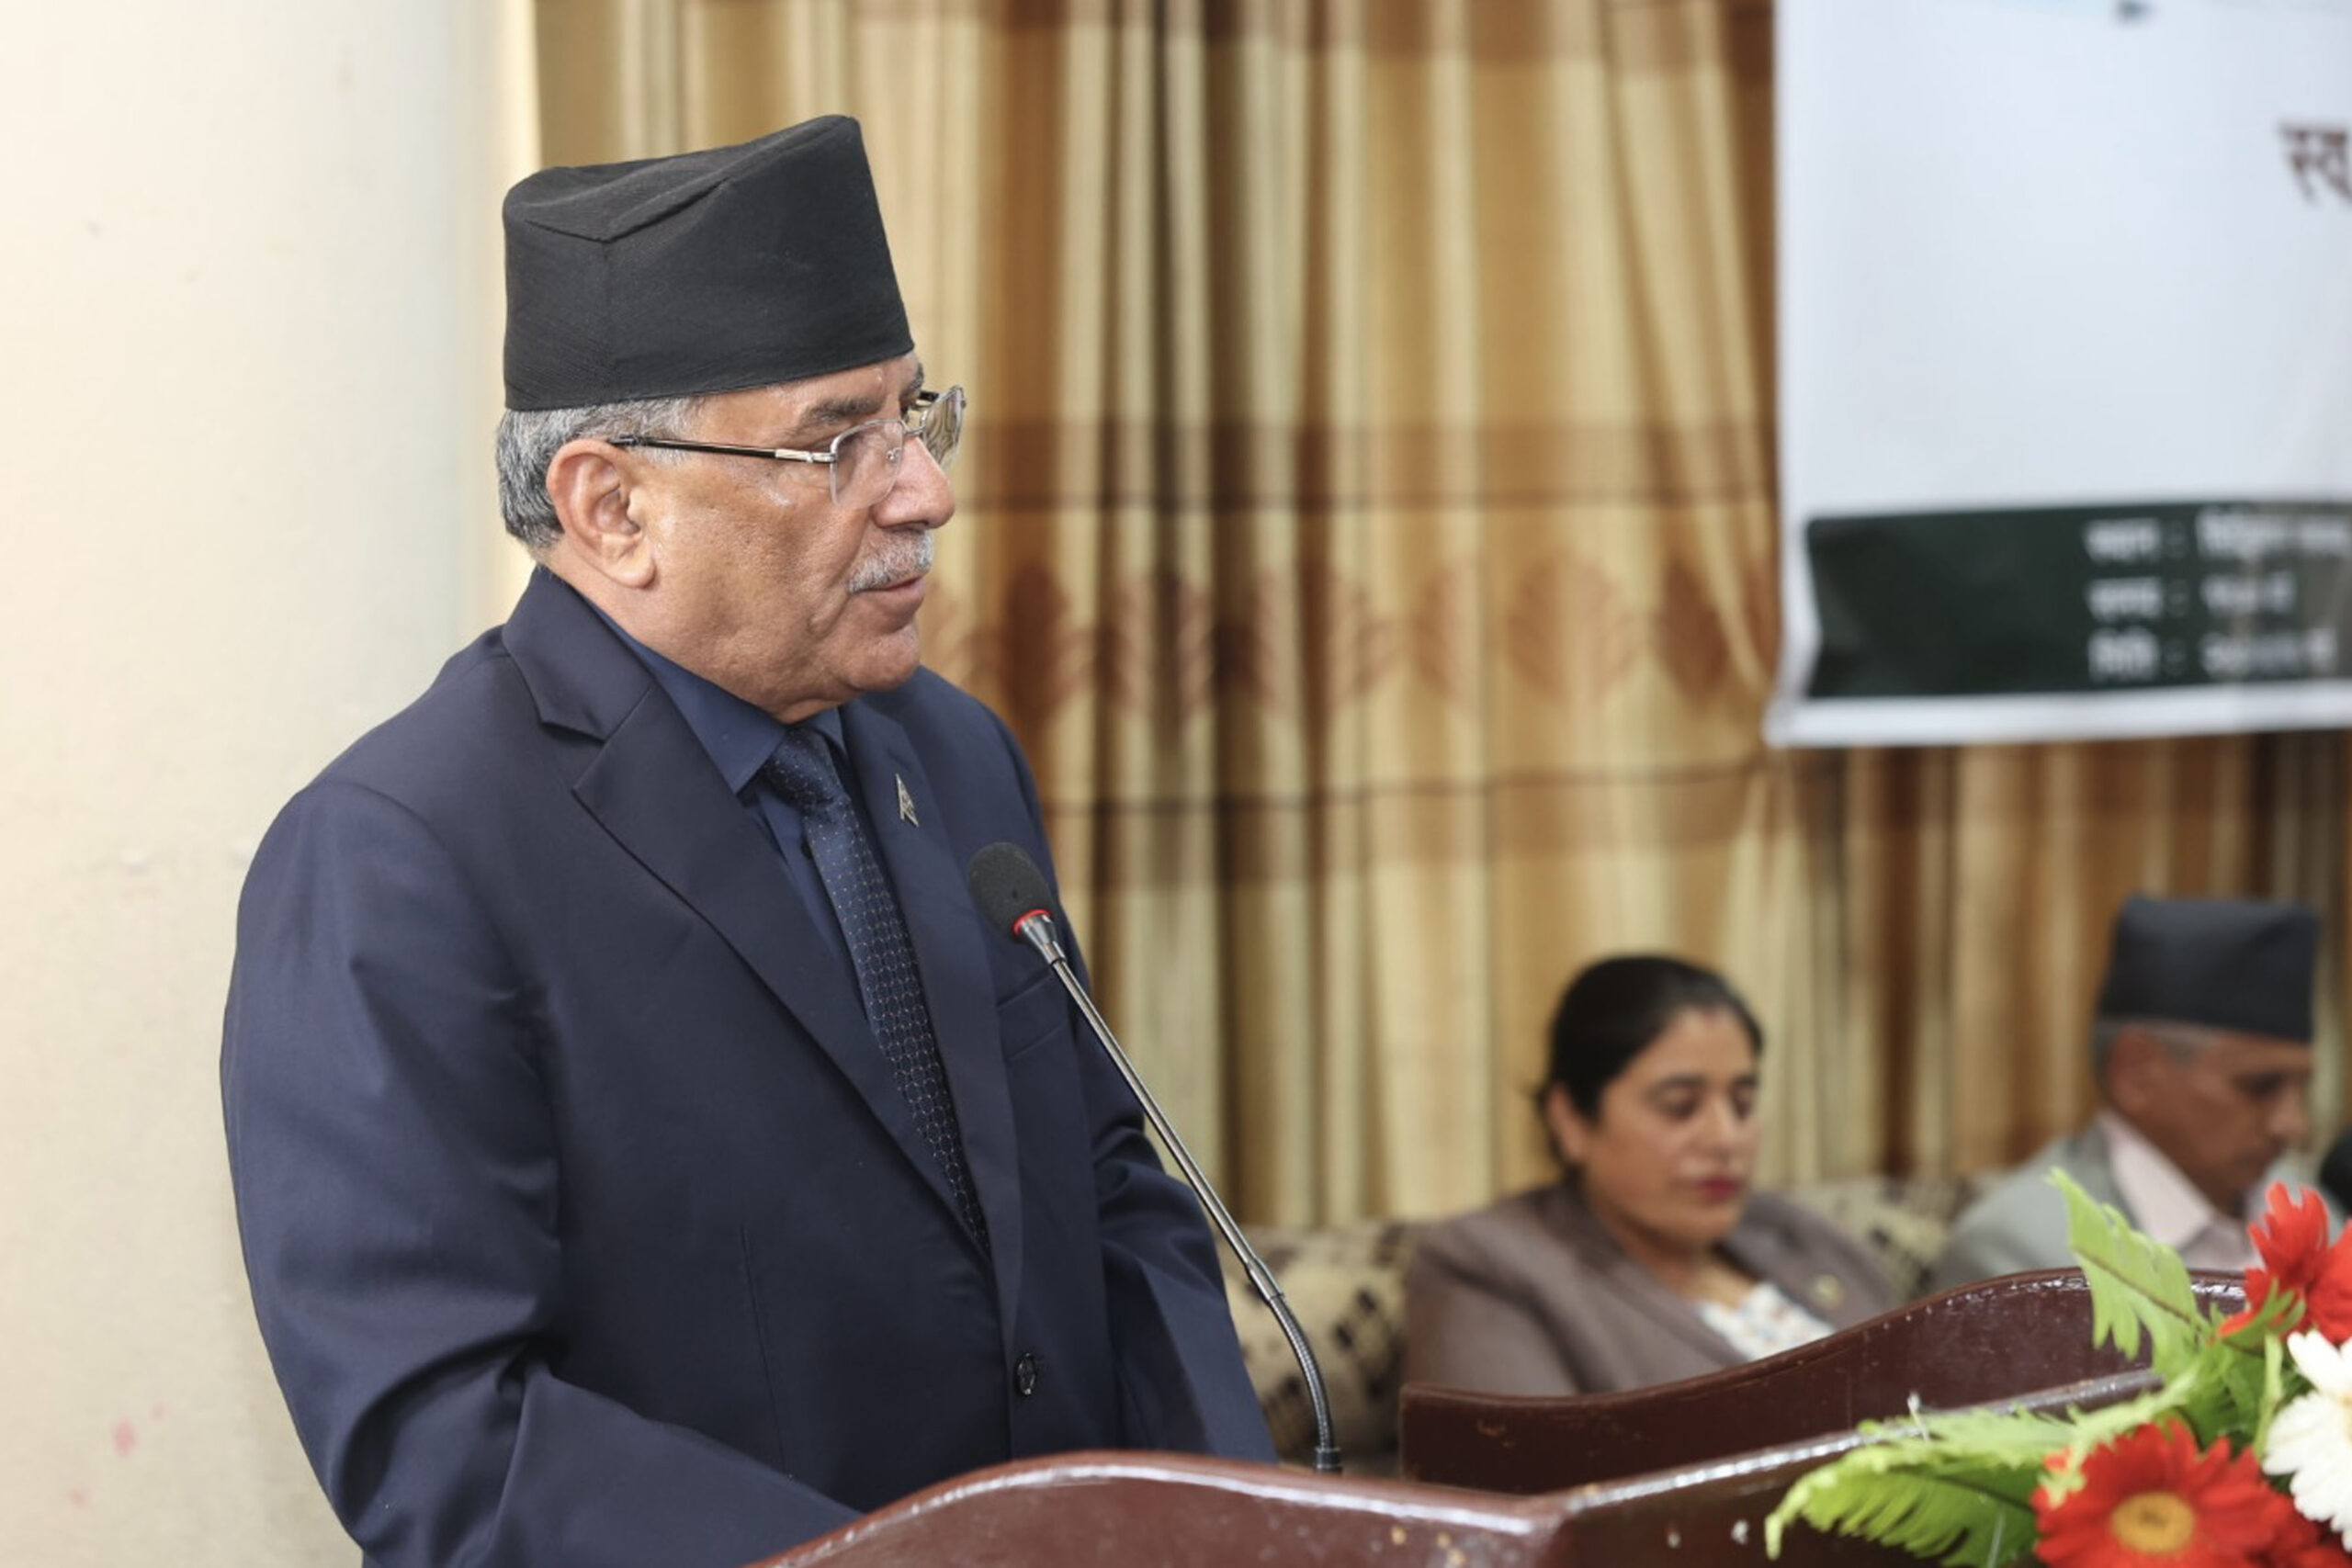 PM Dahal affirms willingness to face arrest if implicated in corruption case